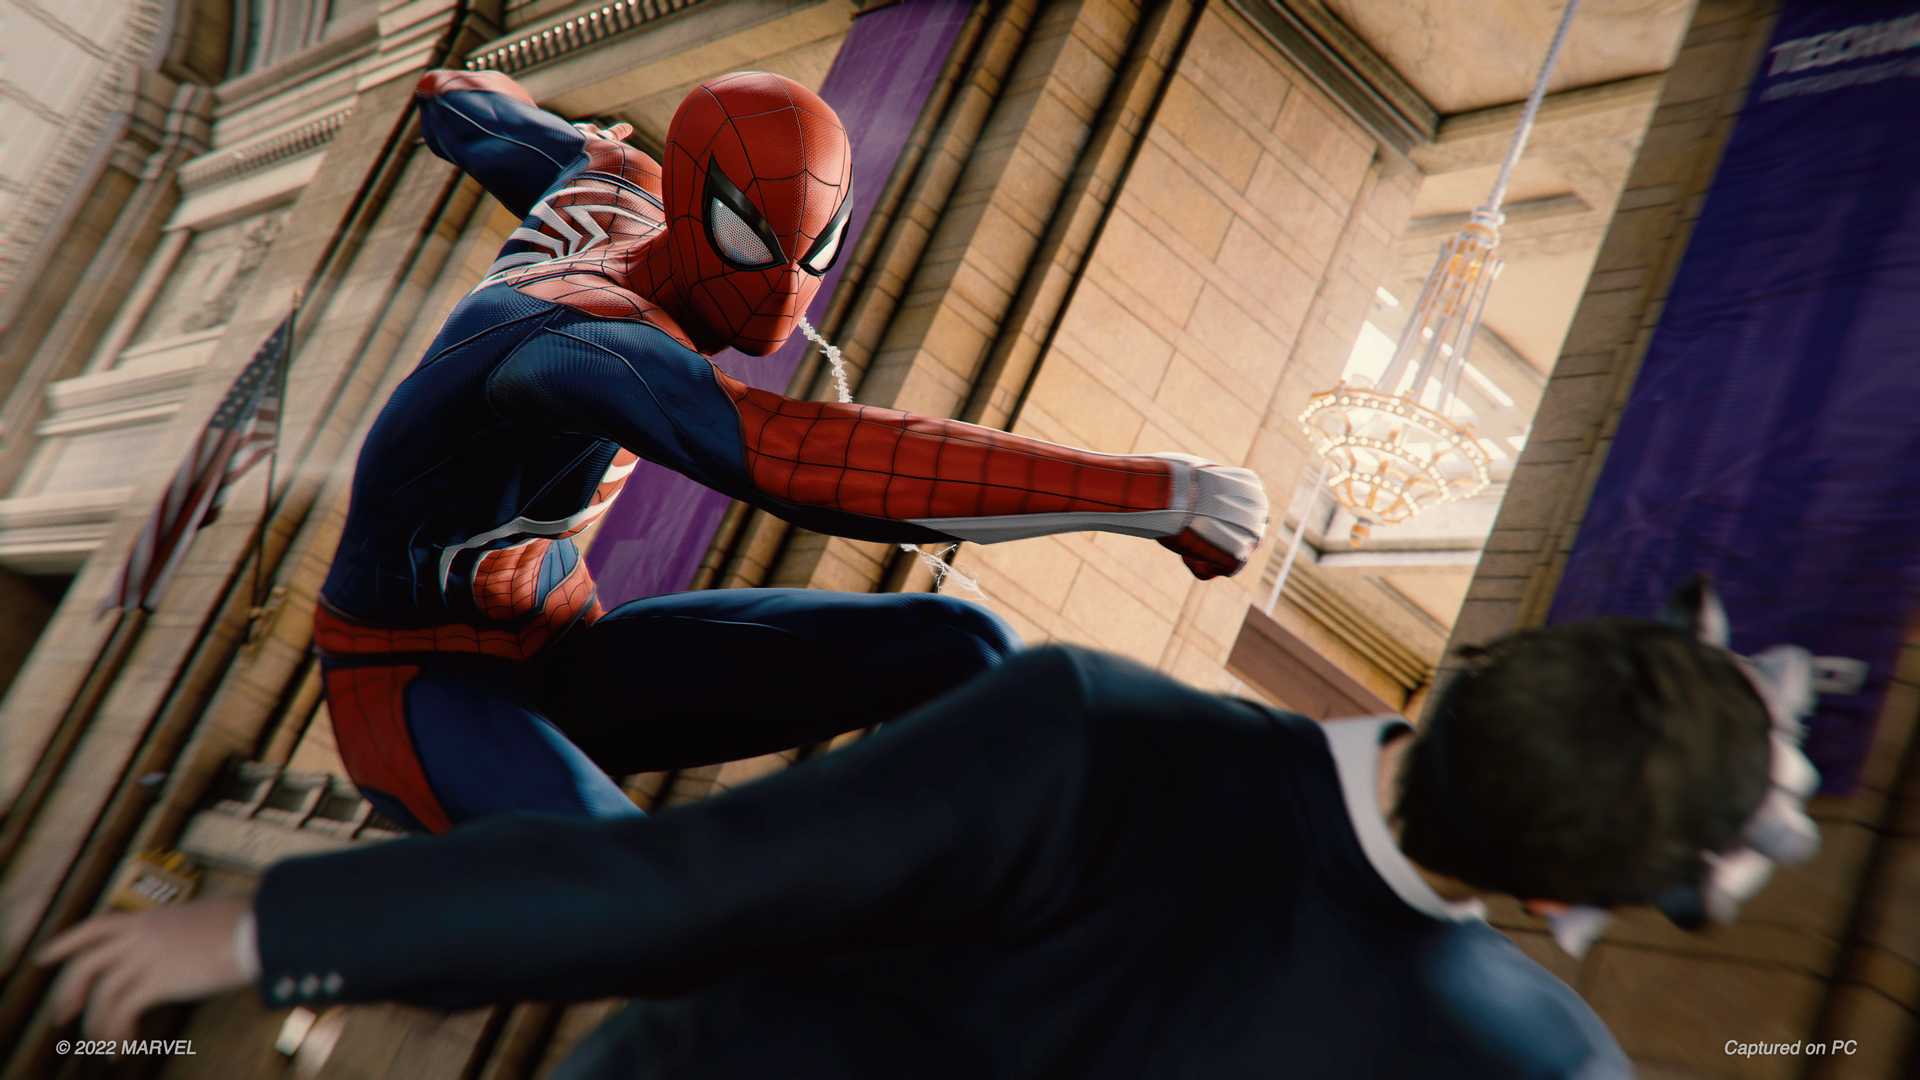 Marvel's Spider-Man: the PC port plays beautifully on Steam Deck